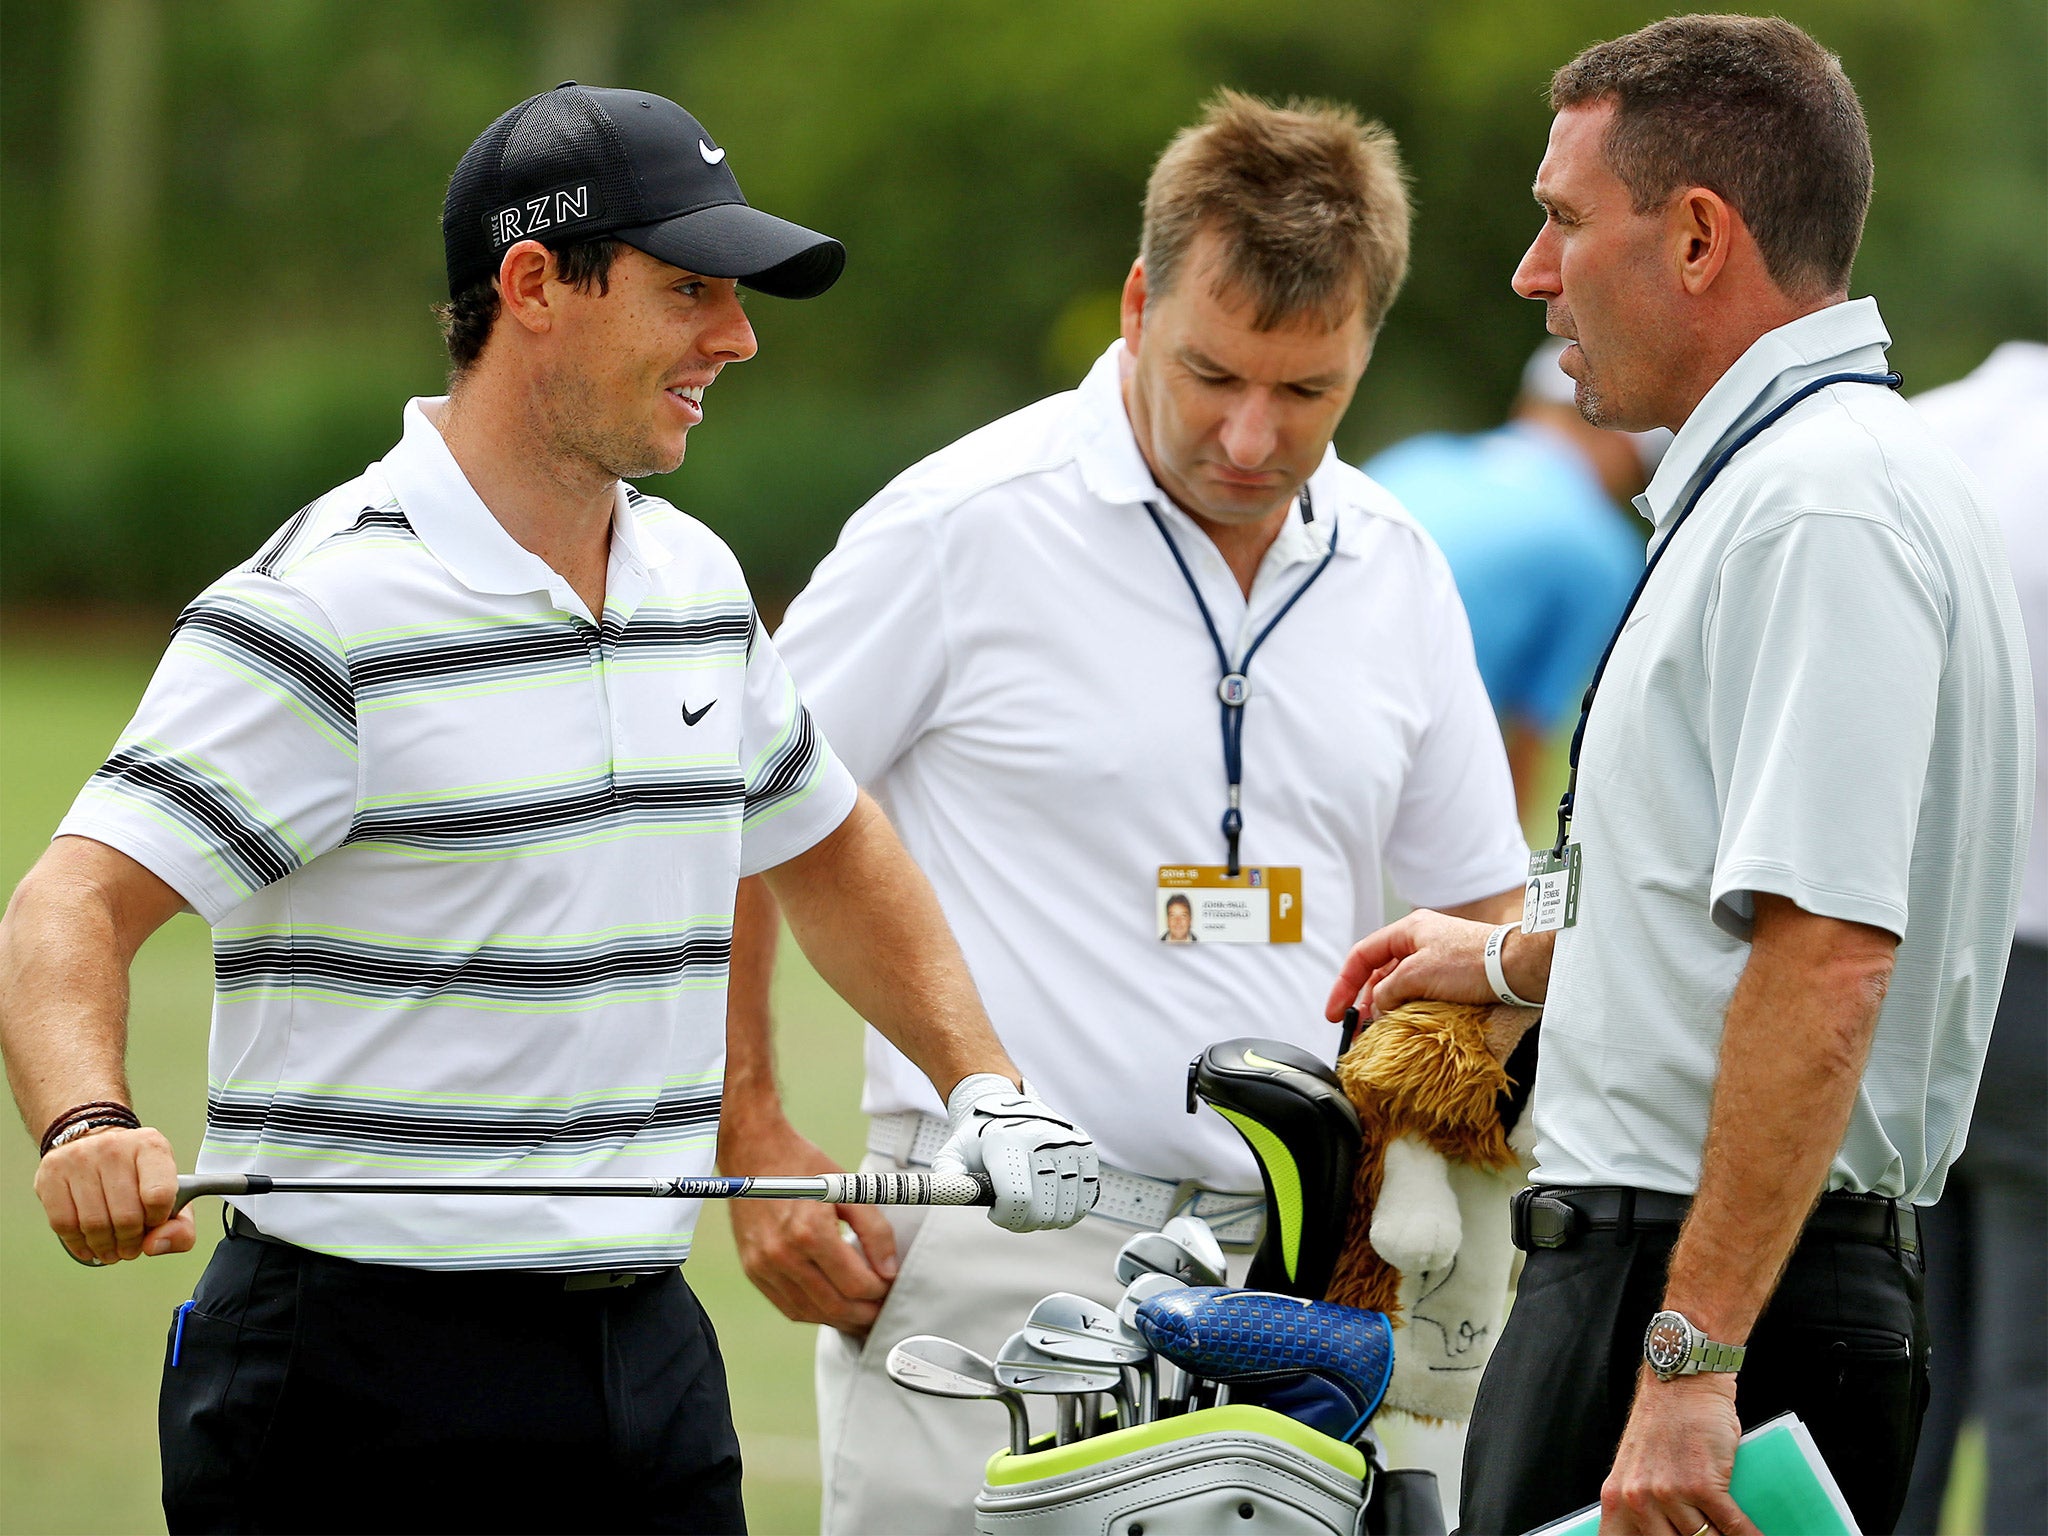 Rory McIlroy in discussion with Tiger Woods’ agent, Mark Steinberg